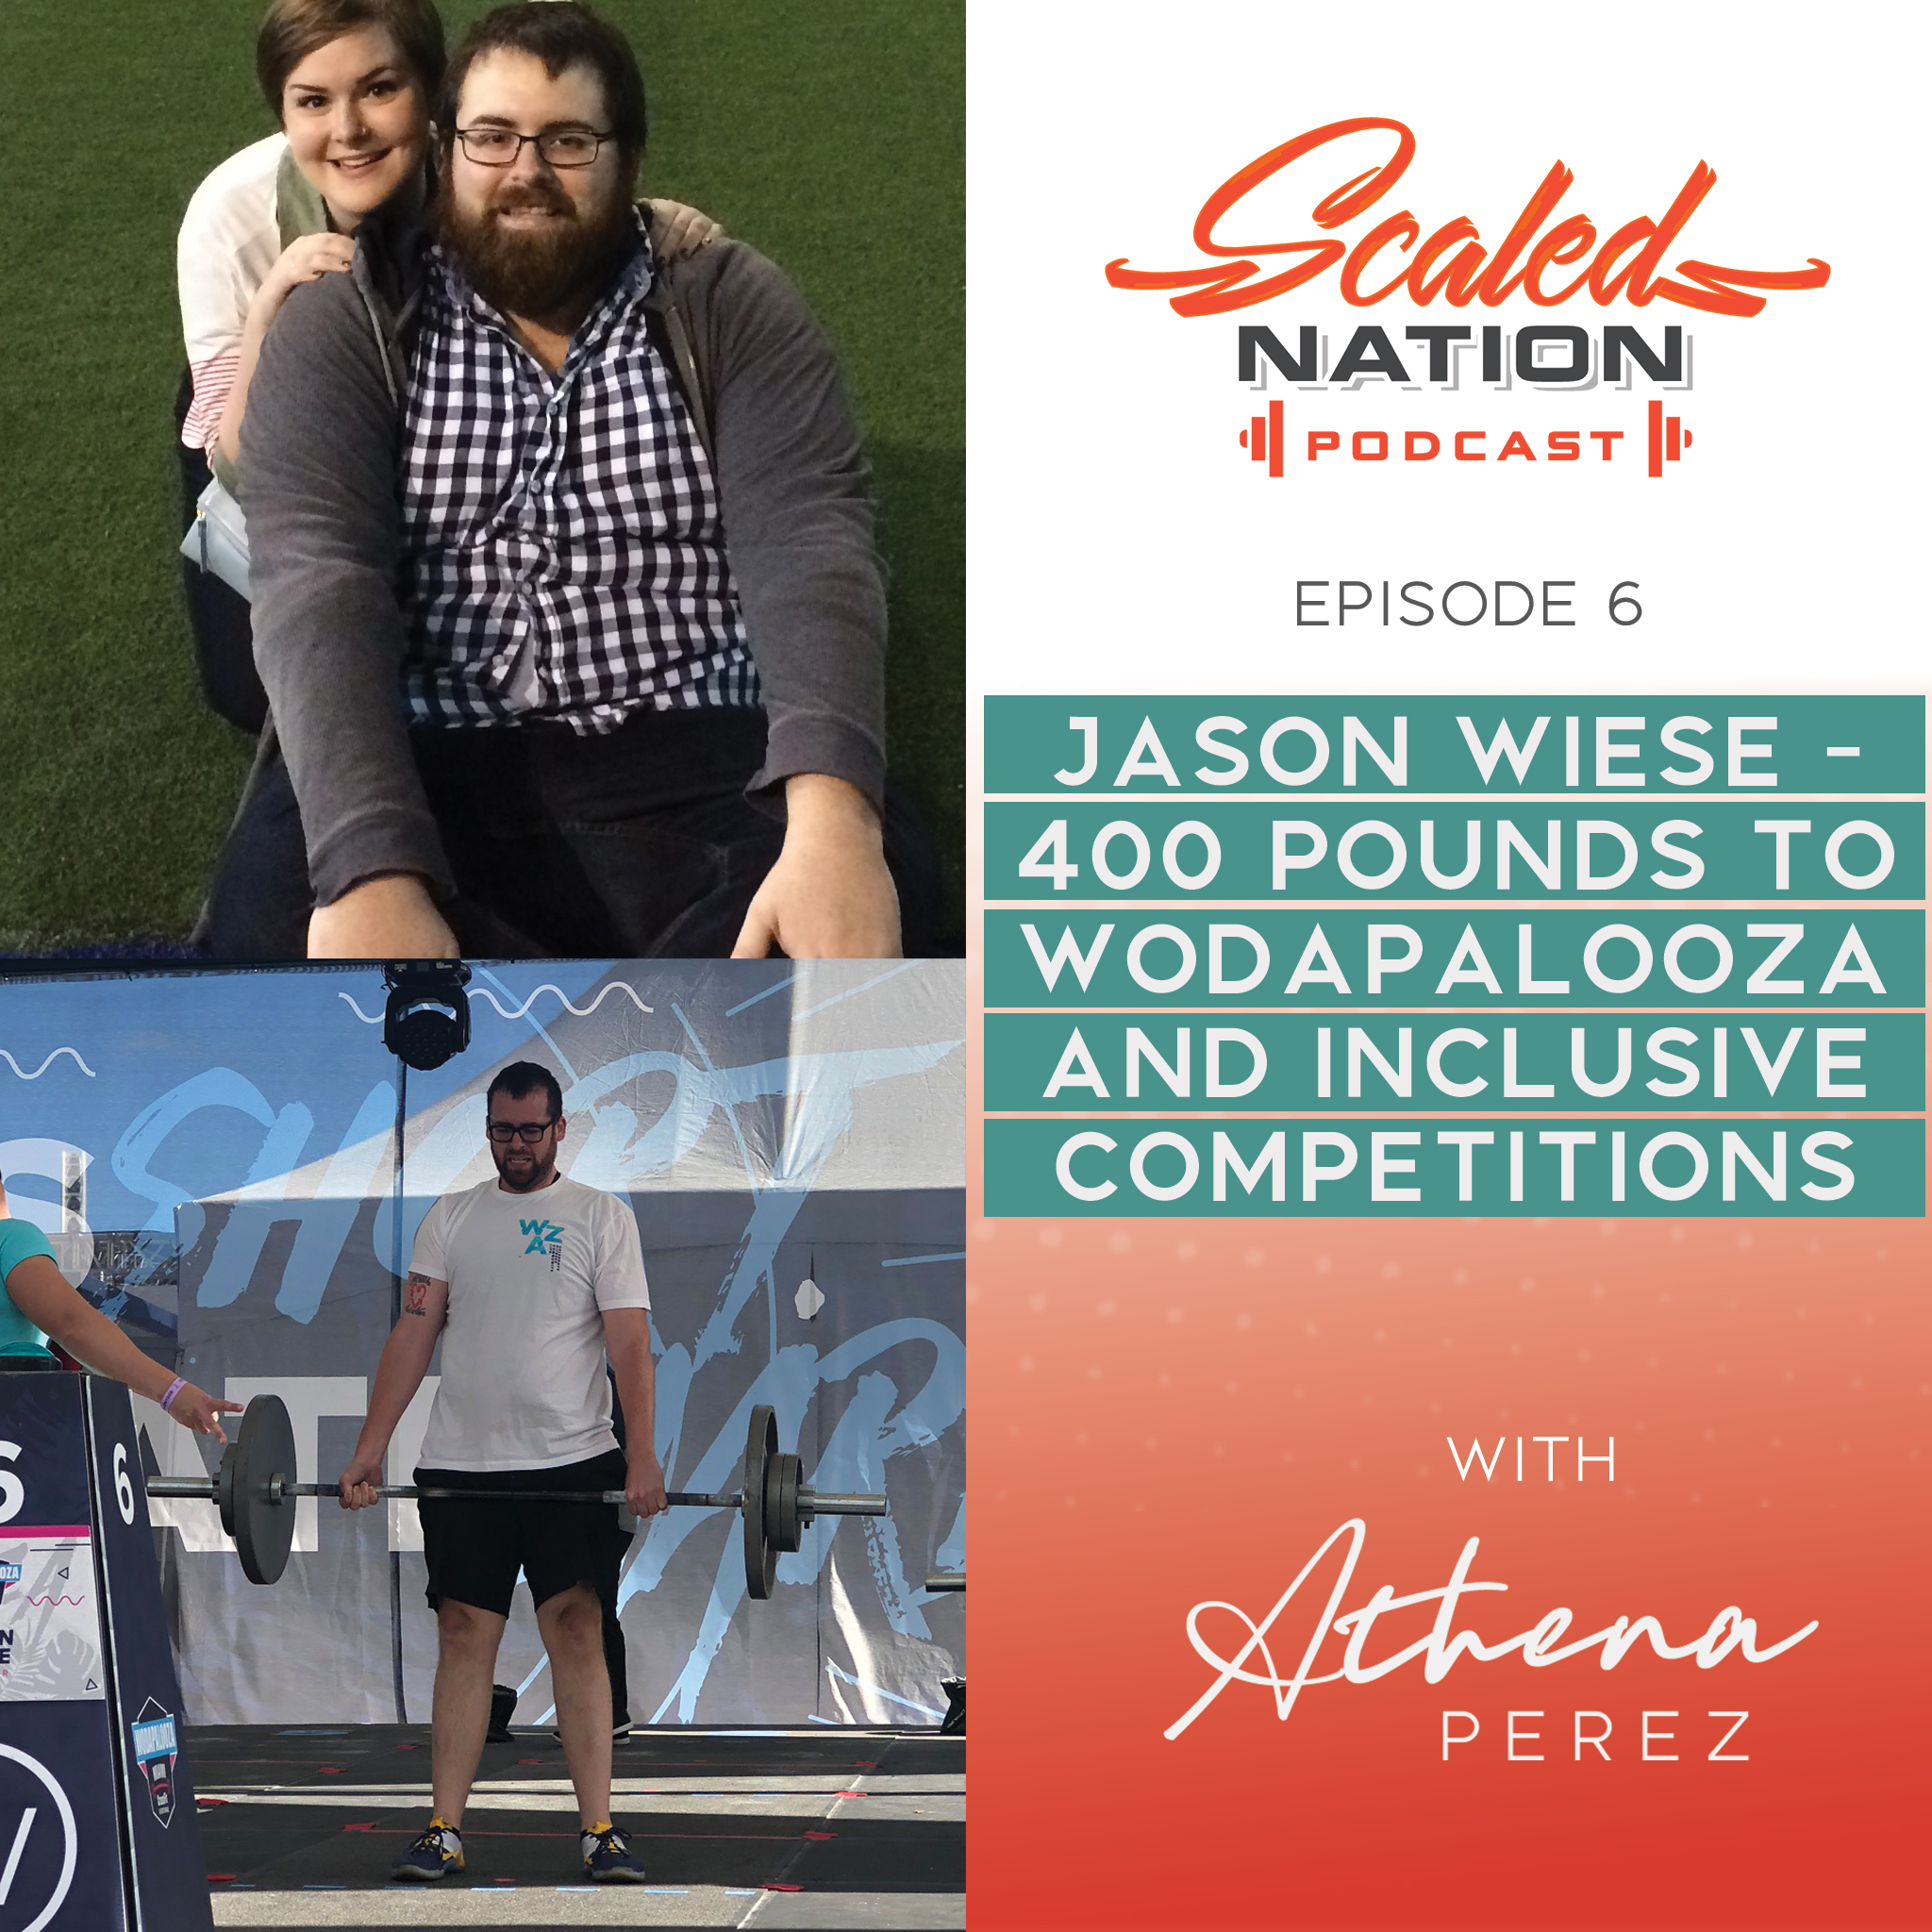 Scaled Nation Podcast - Jason Wiese - 400 pounds to Wodapalooza and Inclusive Competitions